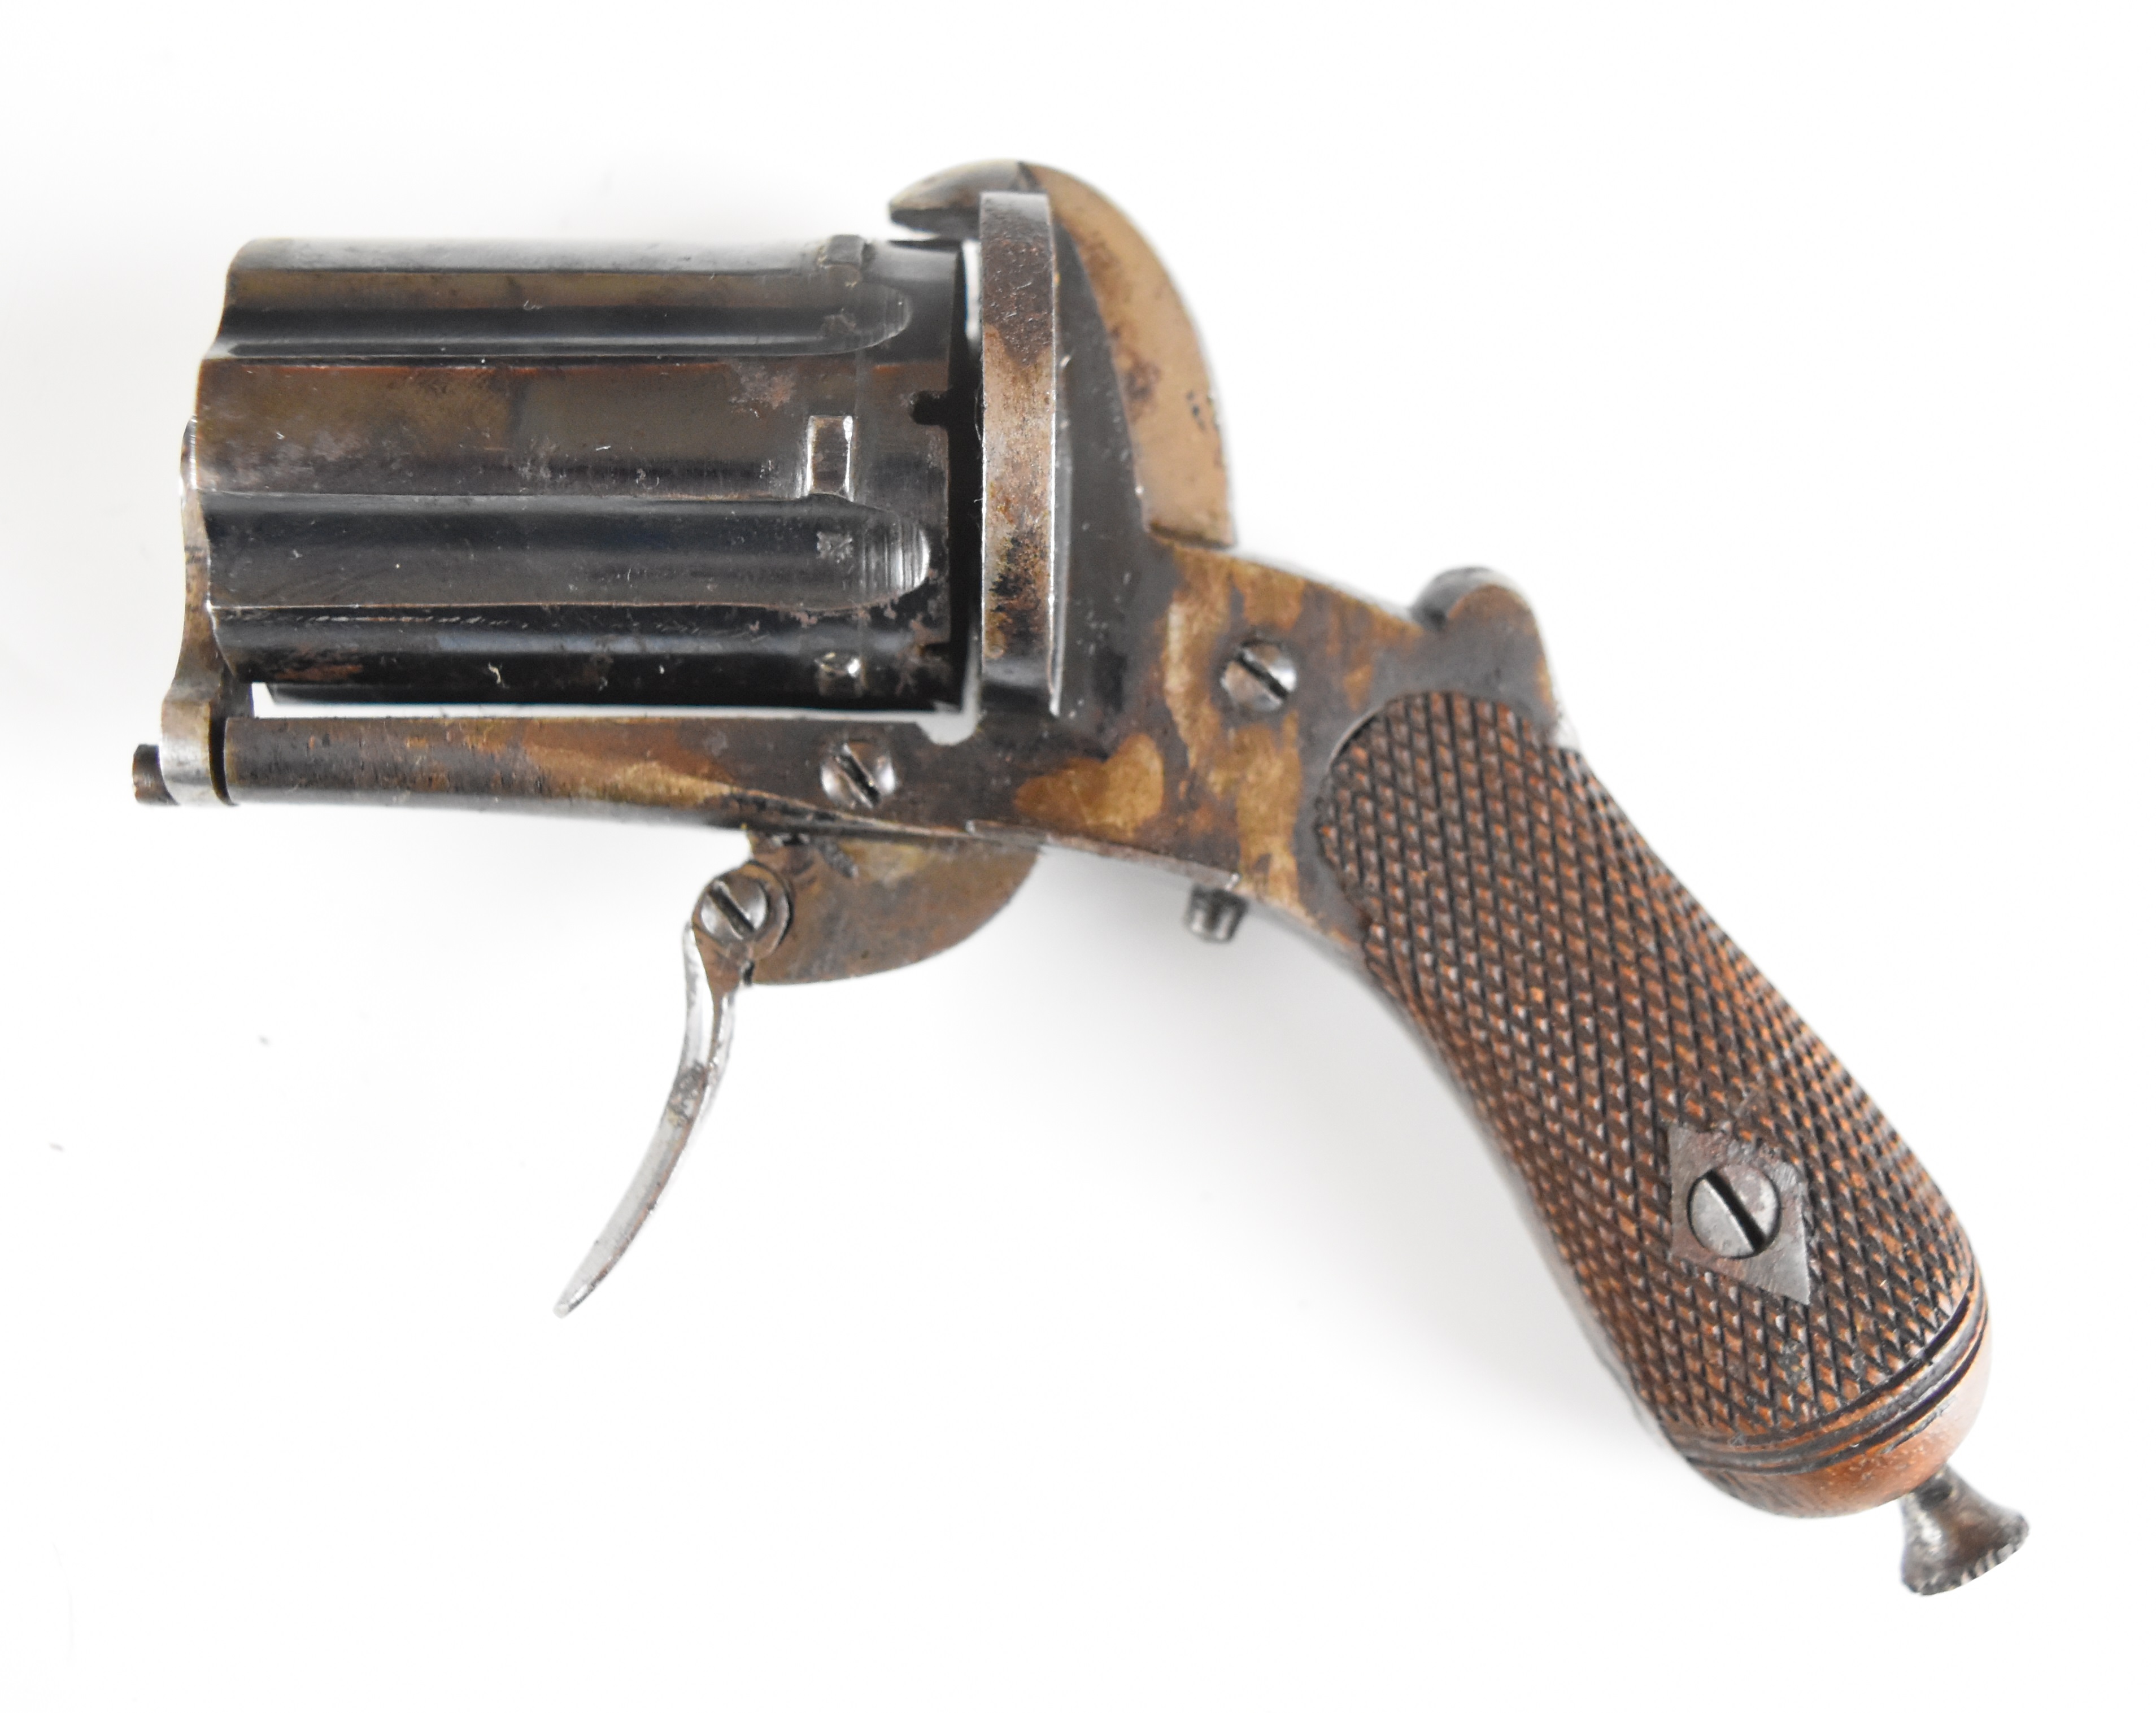 Unnamed 5mm six-shot pinfire hammer action pepperbox pistol/ revolver with chequered wooden grips, - Image 2 of 8